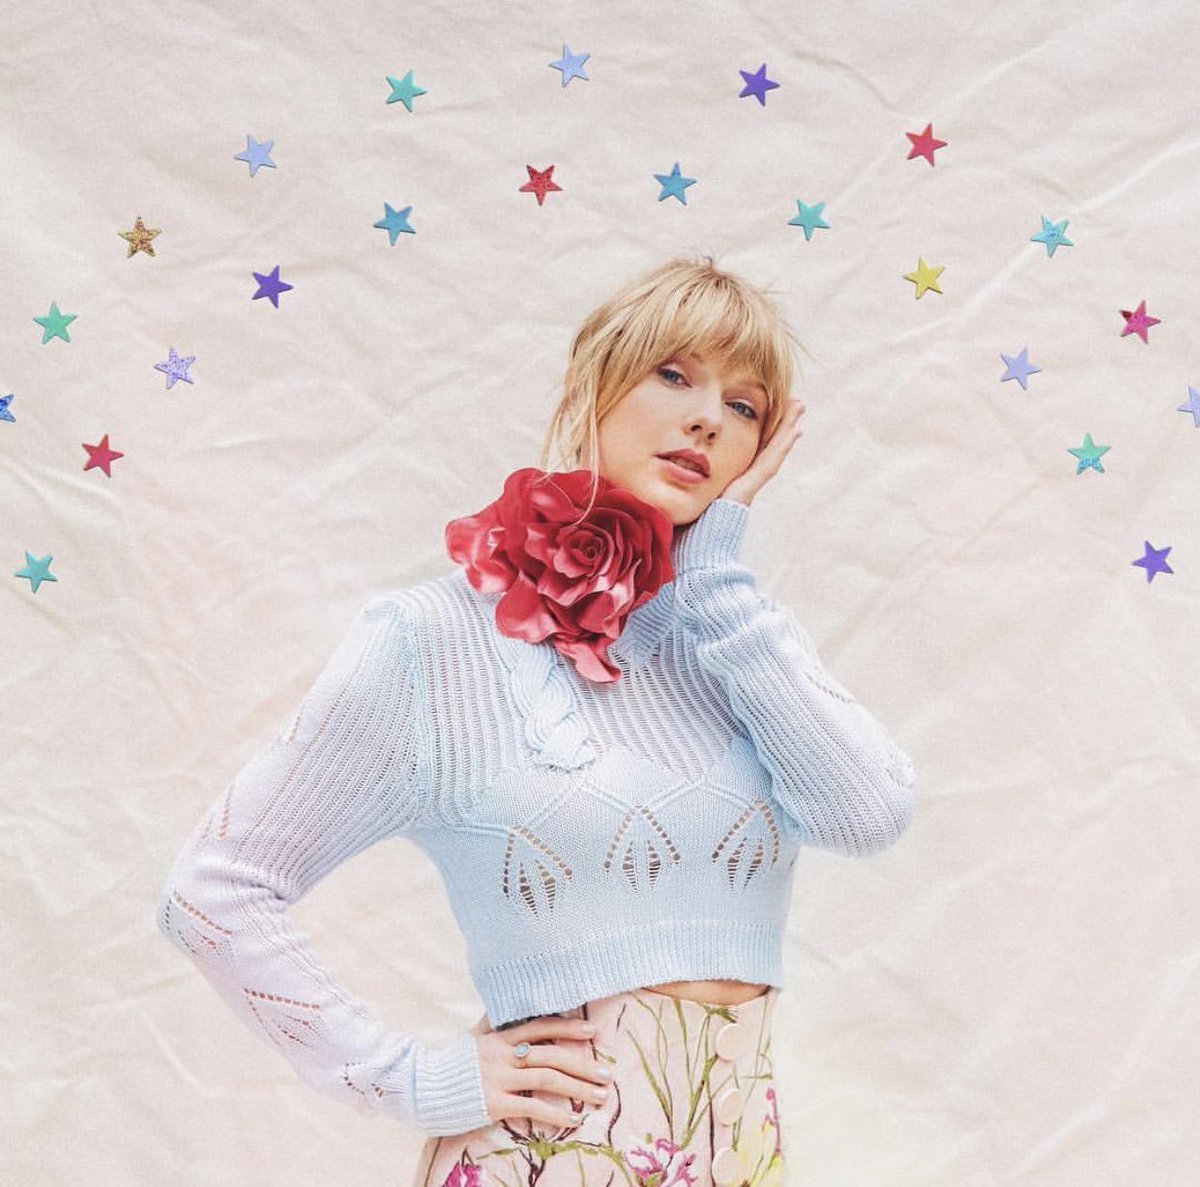 2019 Billboard Music Awards: Taylor Swift To Perform 'ME!' - That Grape Juice1200 x 1187